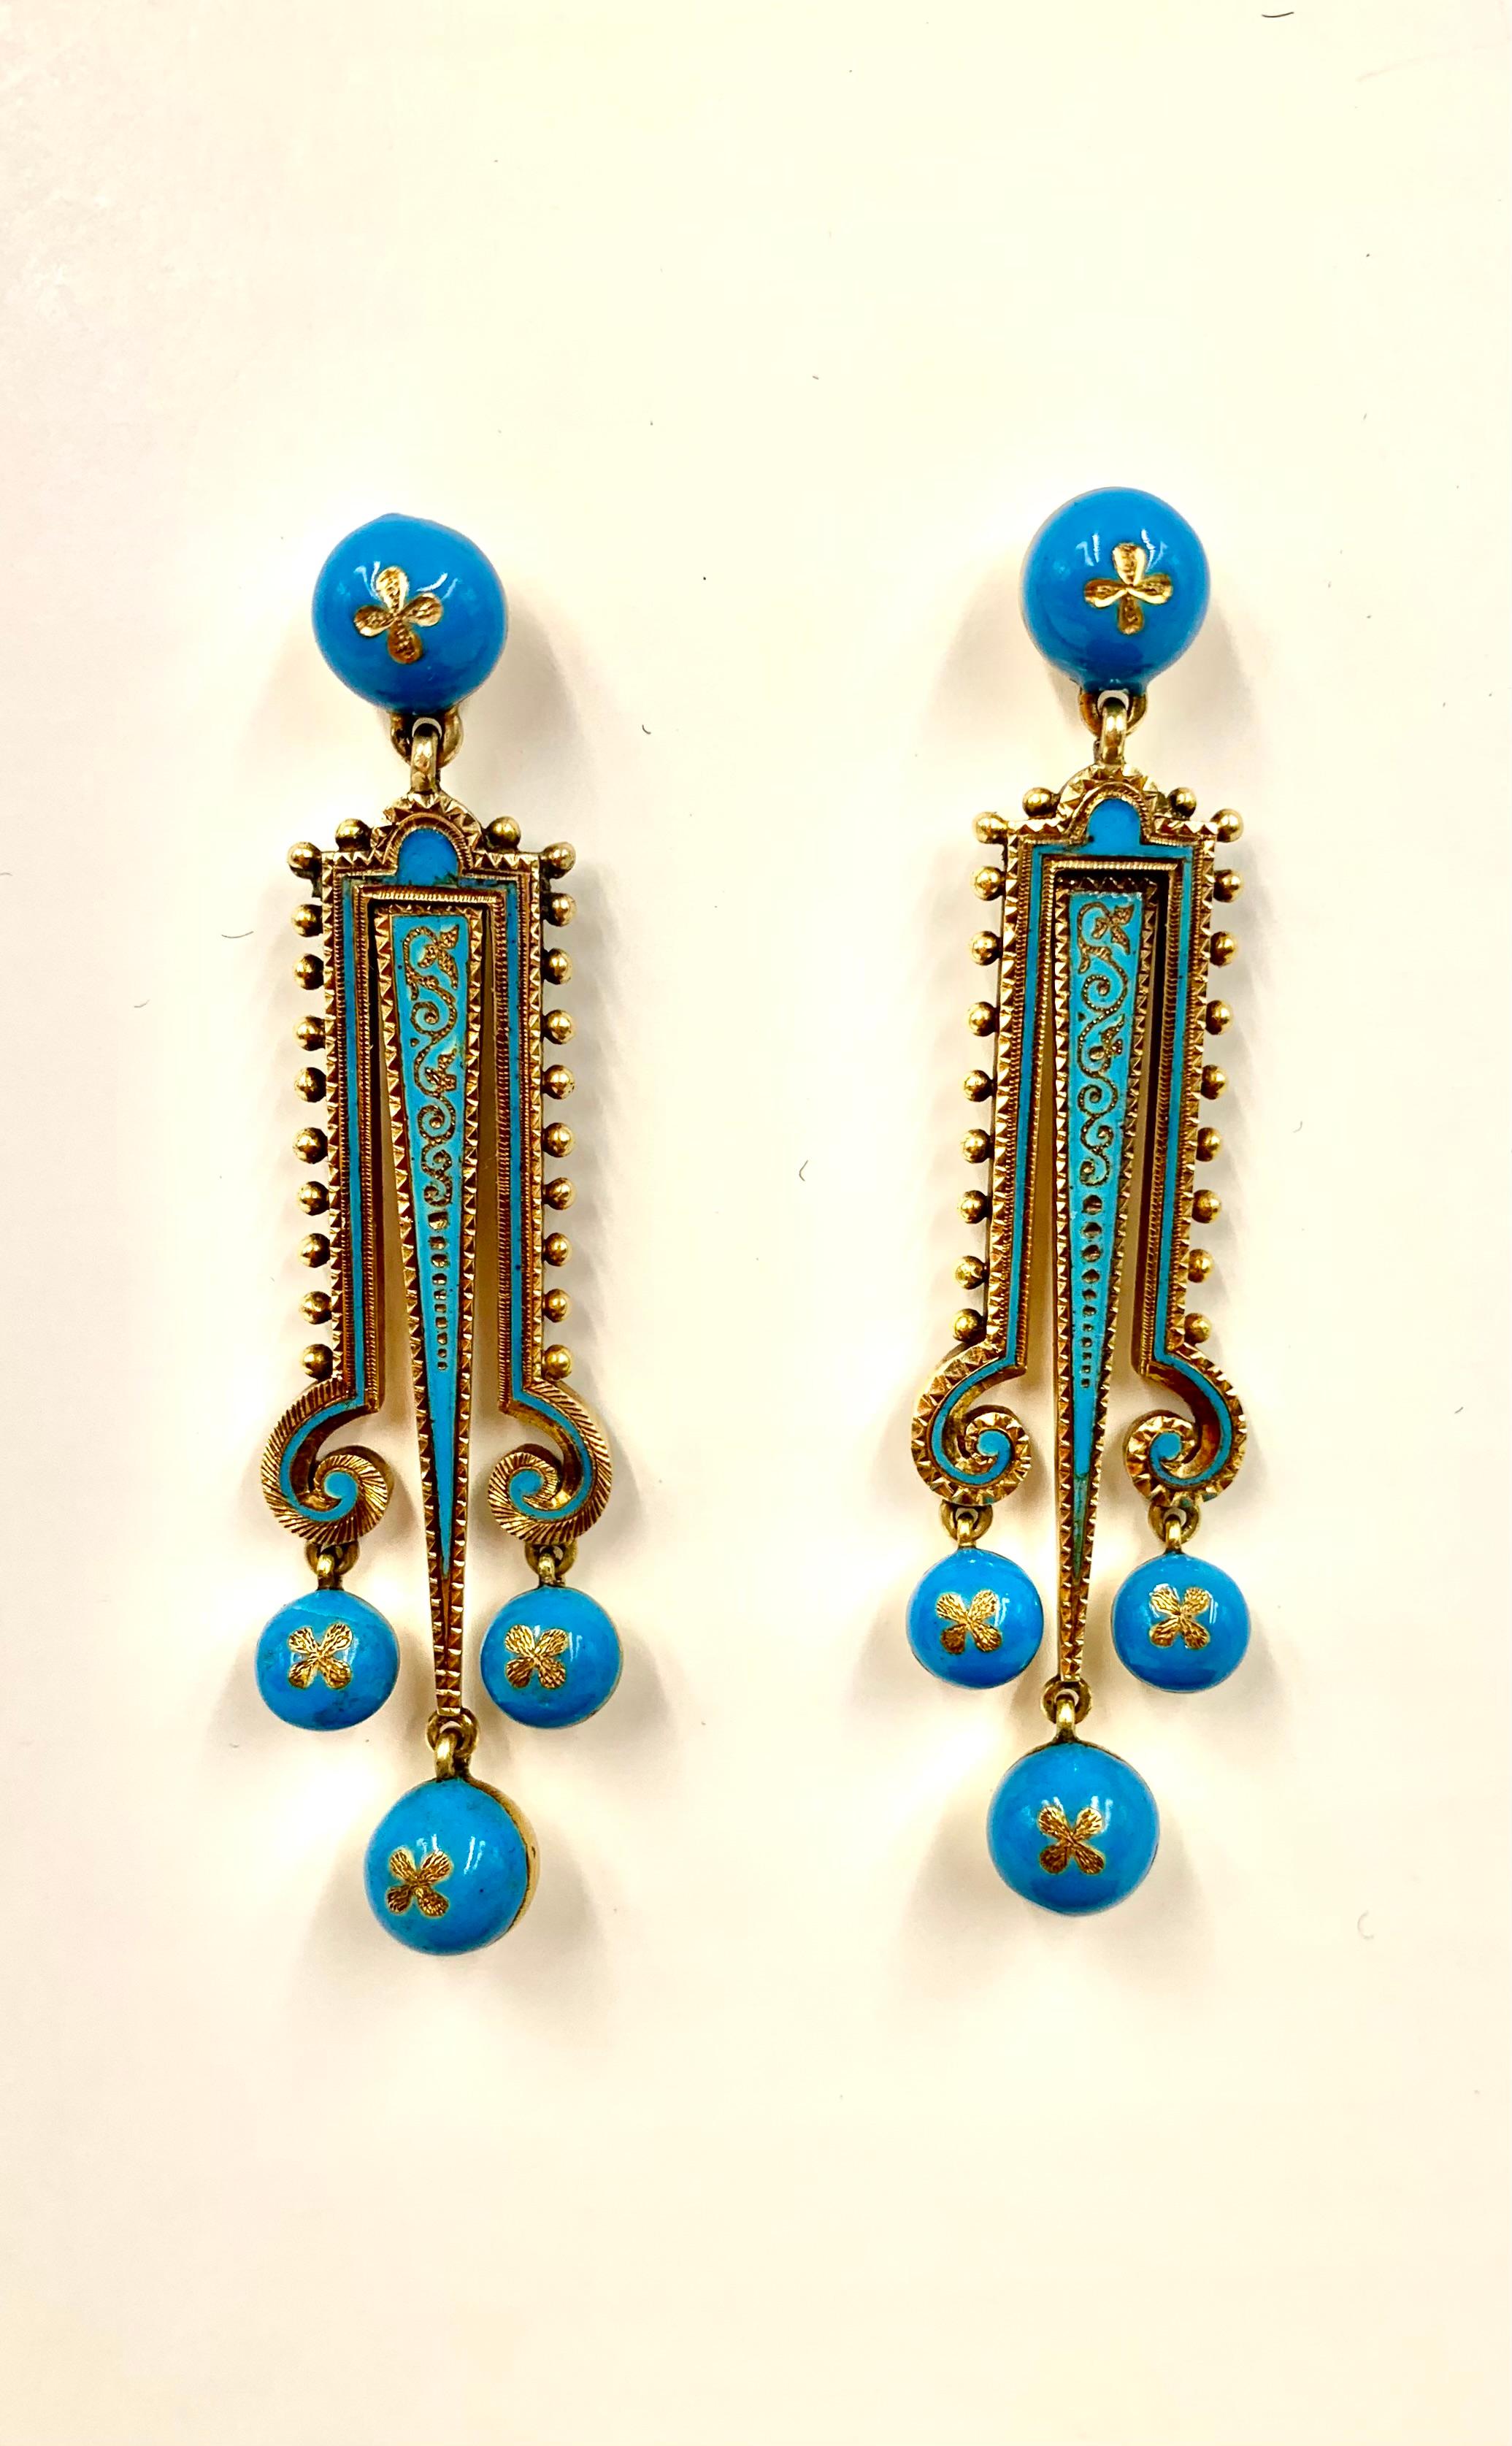 Etruscan Revival Turquoise Enamel 14K Yellow Gold Earrings and Brooch Parure For Sale 7